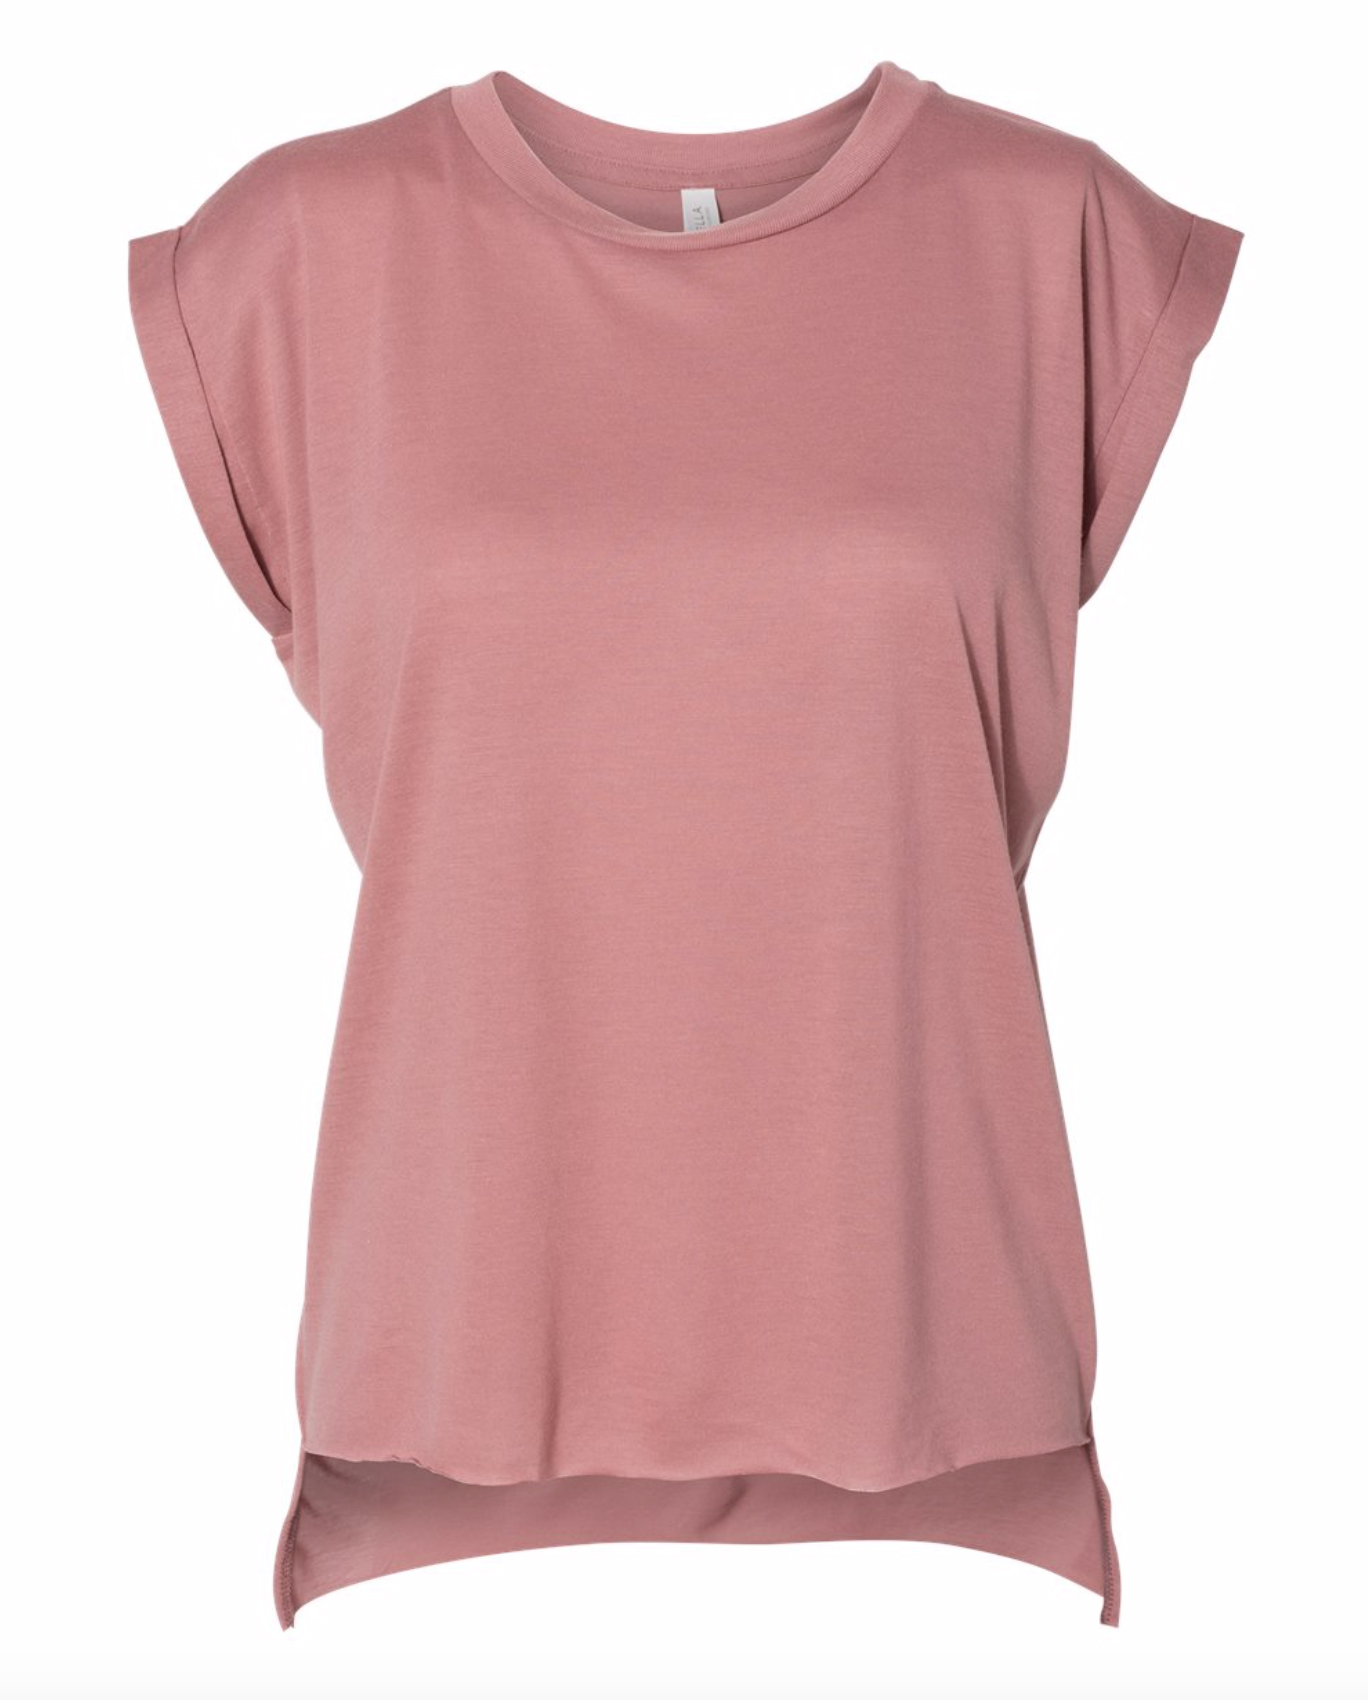 Ladies Flowy Sleeveless Tee w/rolled cuffs in MAUVE